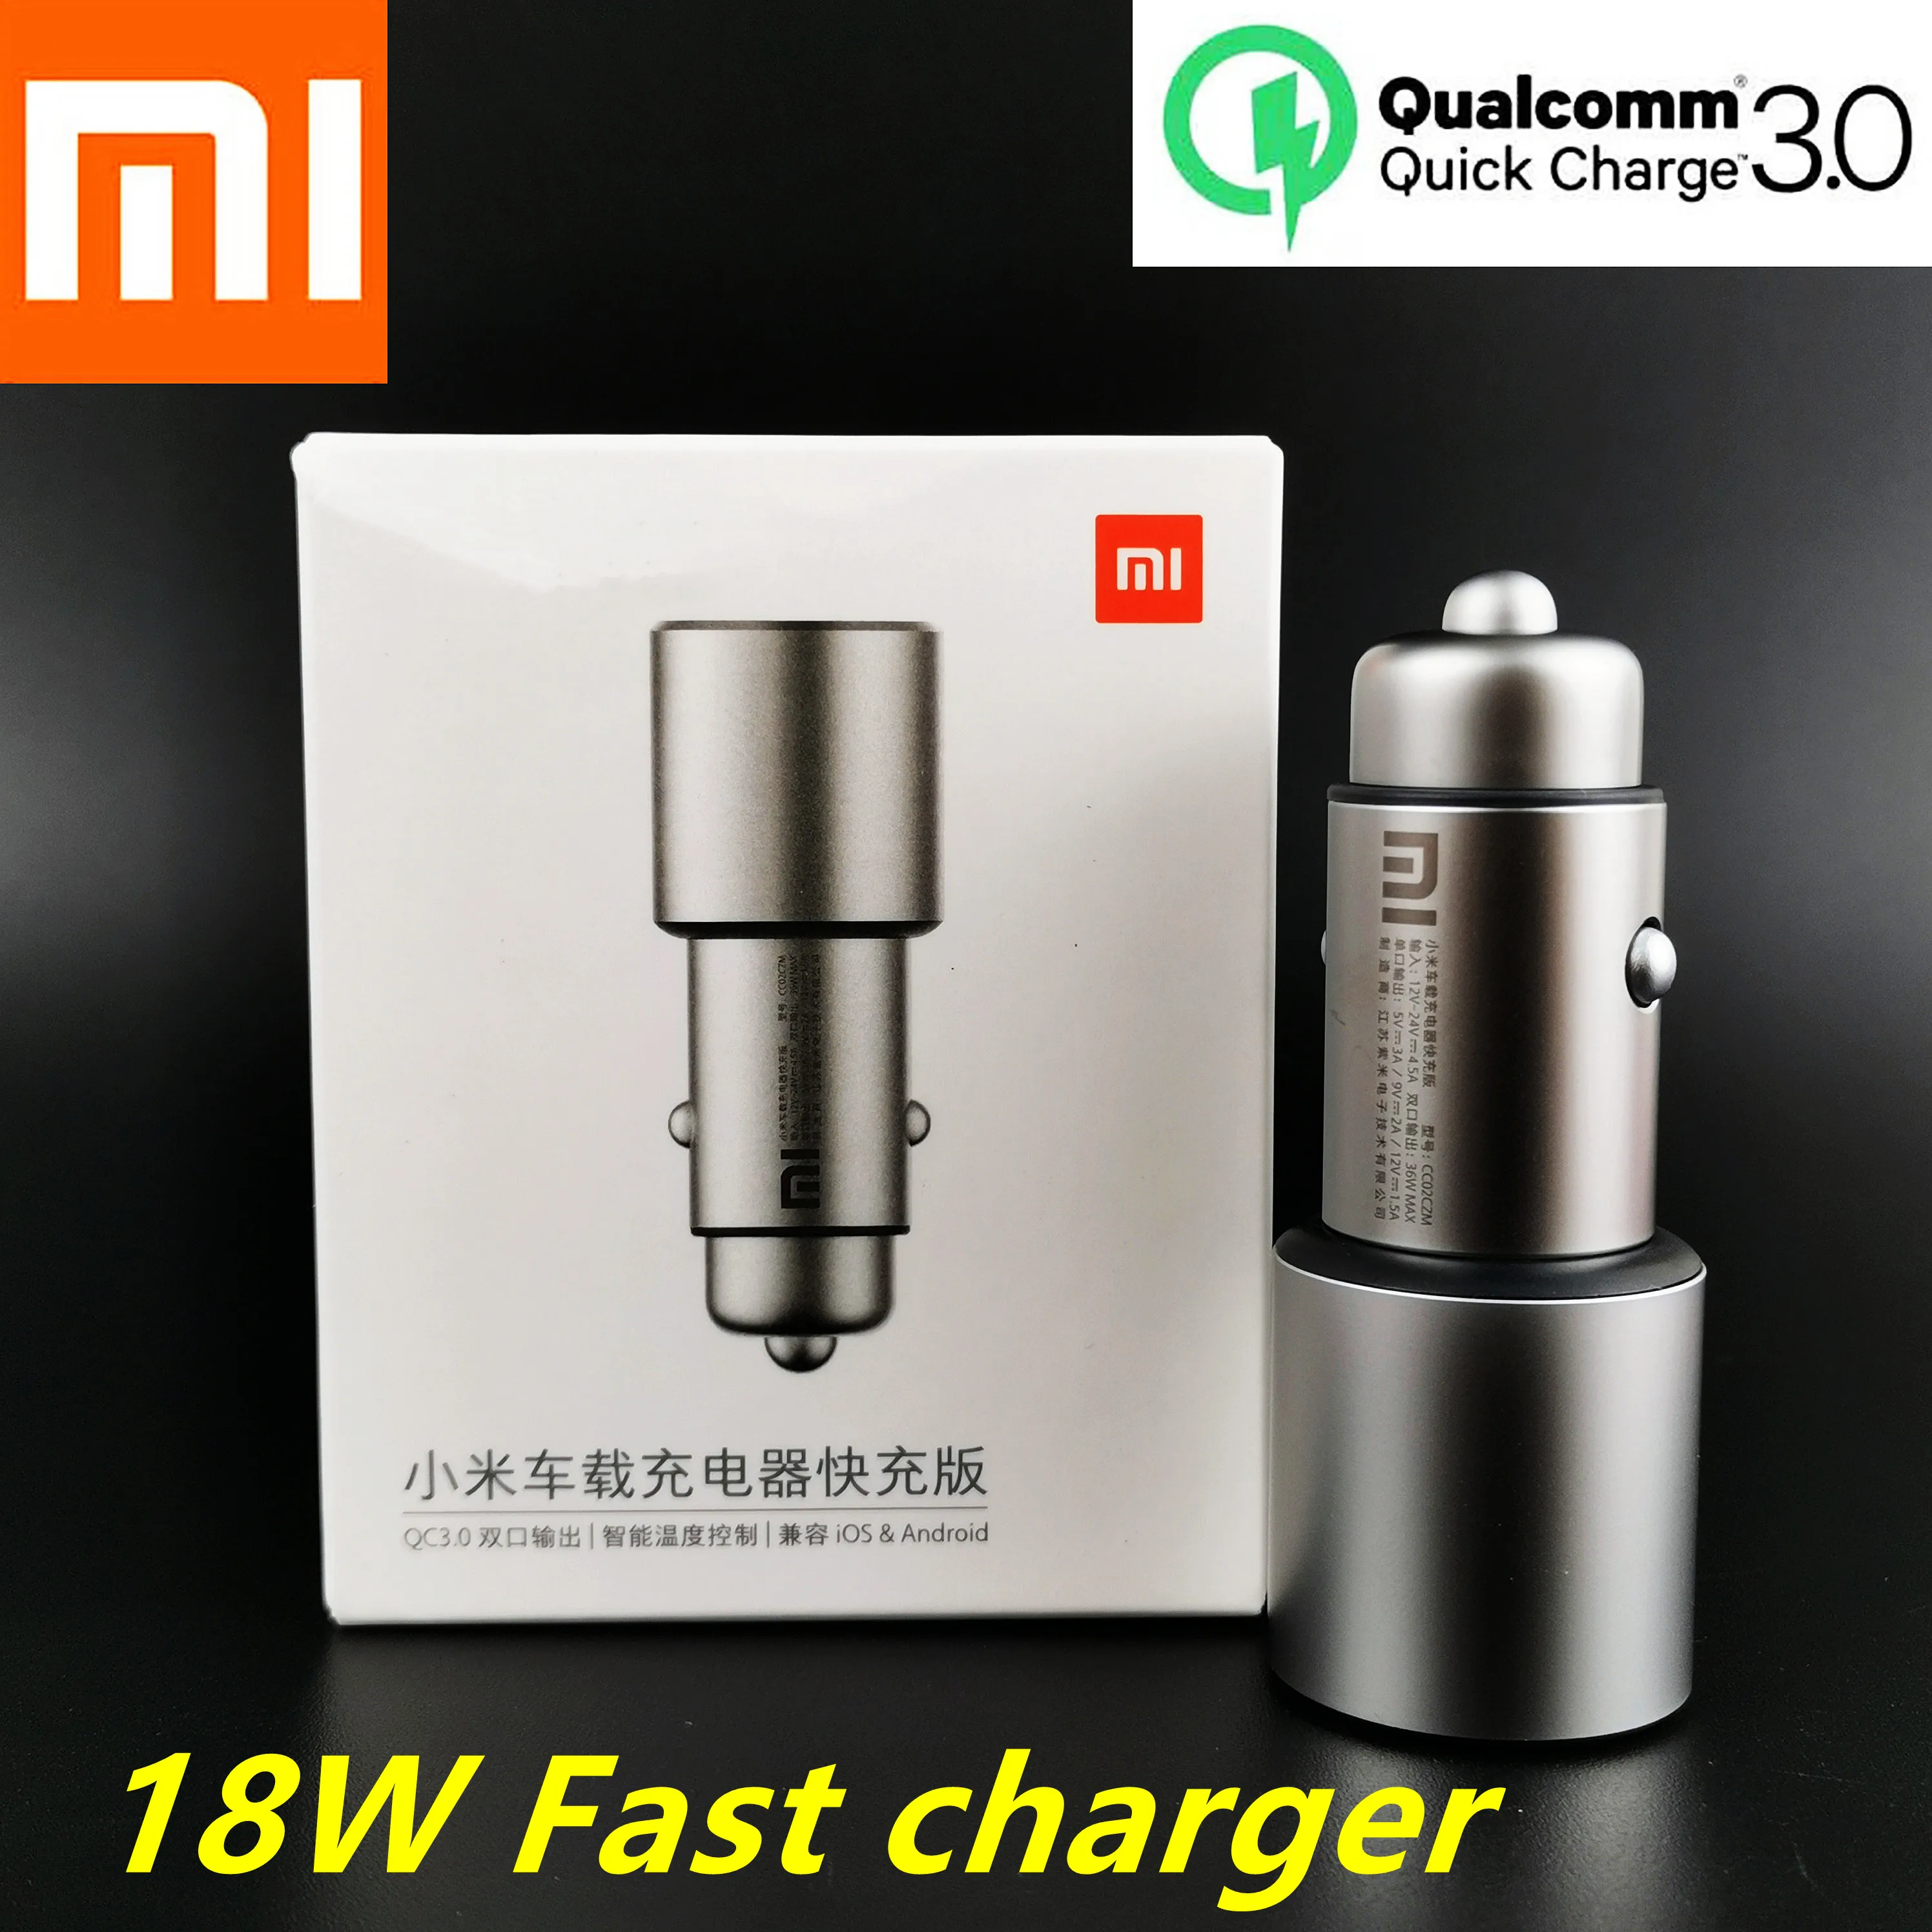 

Xiaomi Car Charger QC 3.0 Original 18w Fast Charge Dual USB Port Chargers 5V/3A 9V/2A 12V/1.5A For Xiaomi Mobile Phone